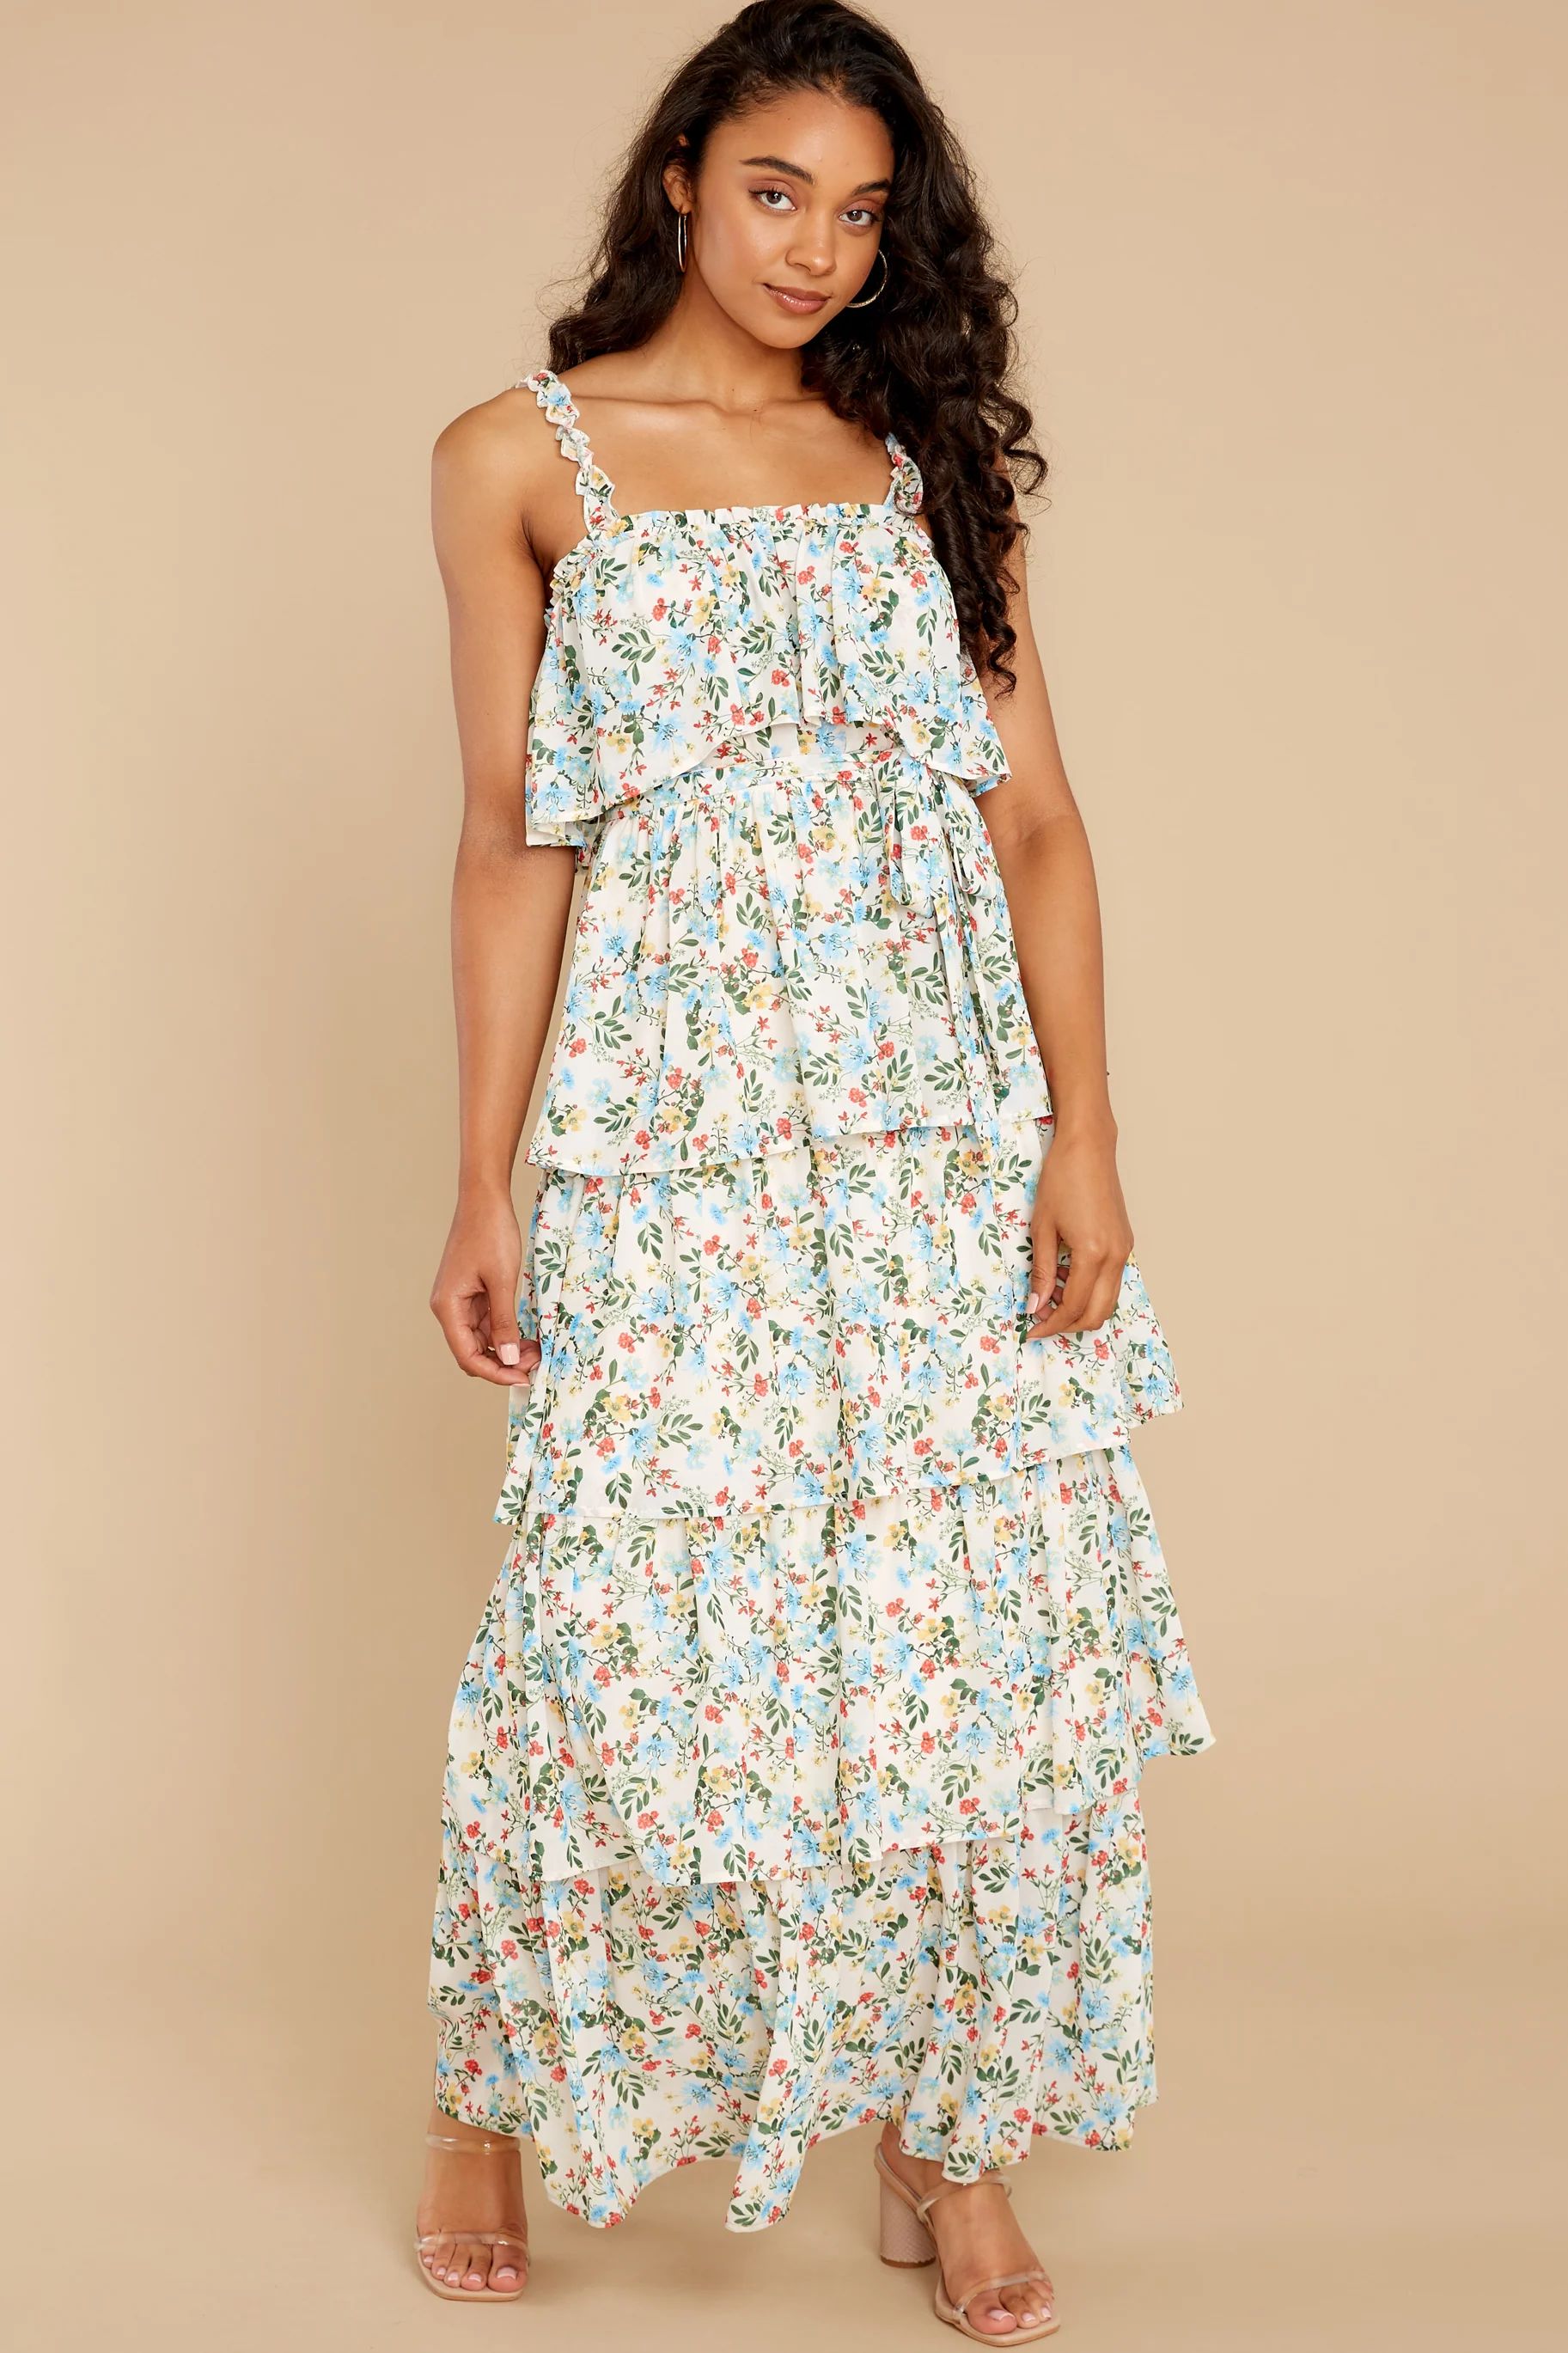 Magical Means Ivory Floral Print Maxi Dress | Red Dress 